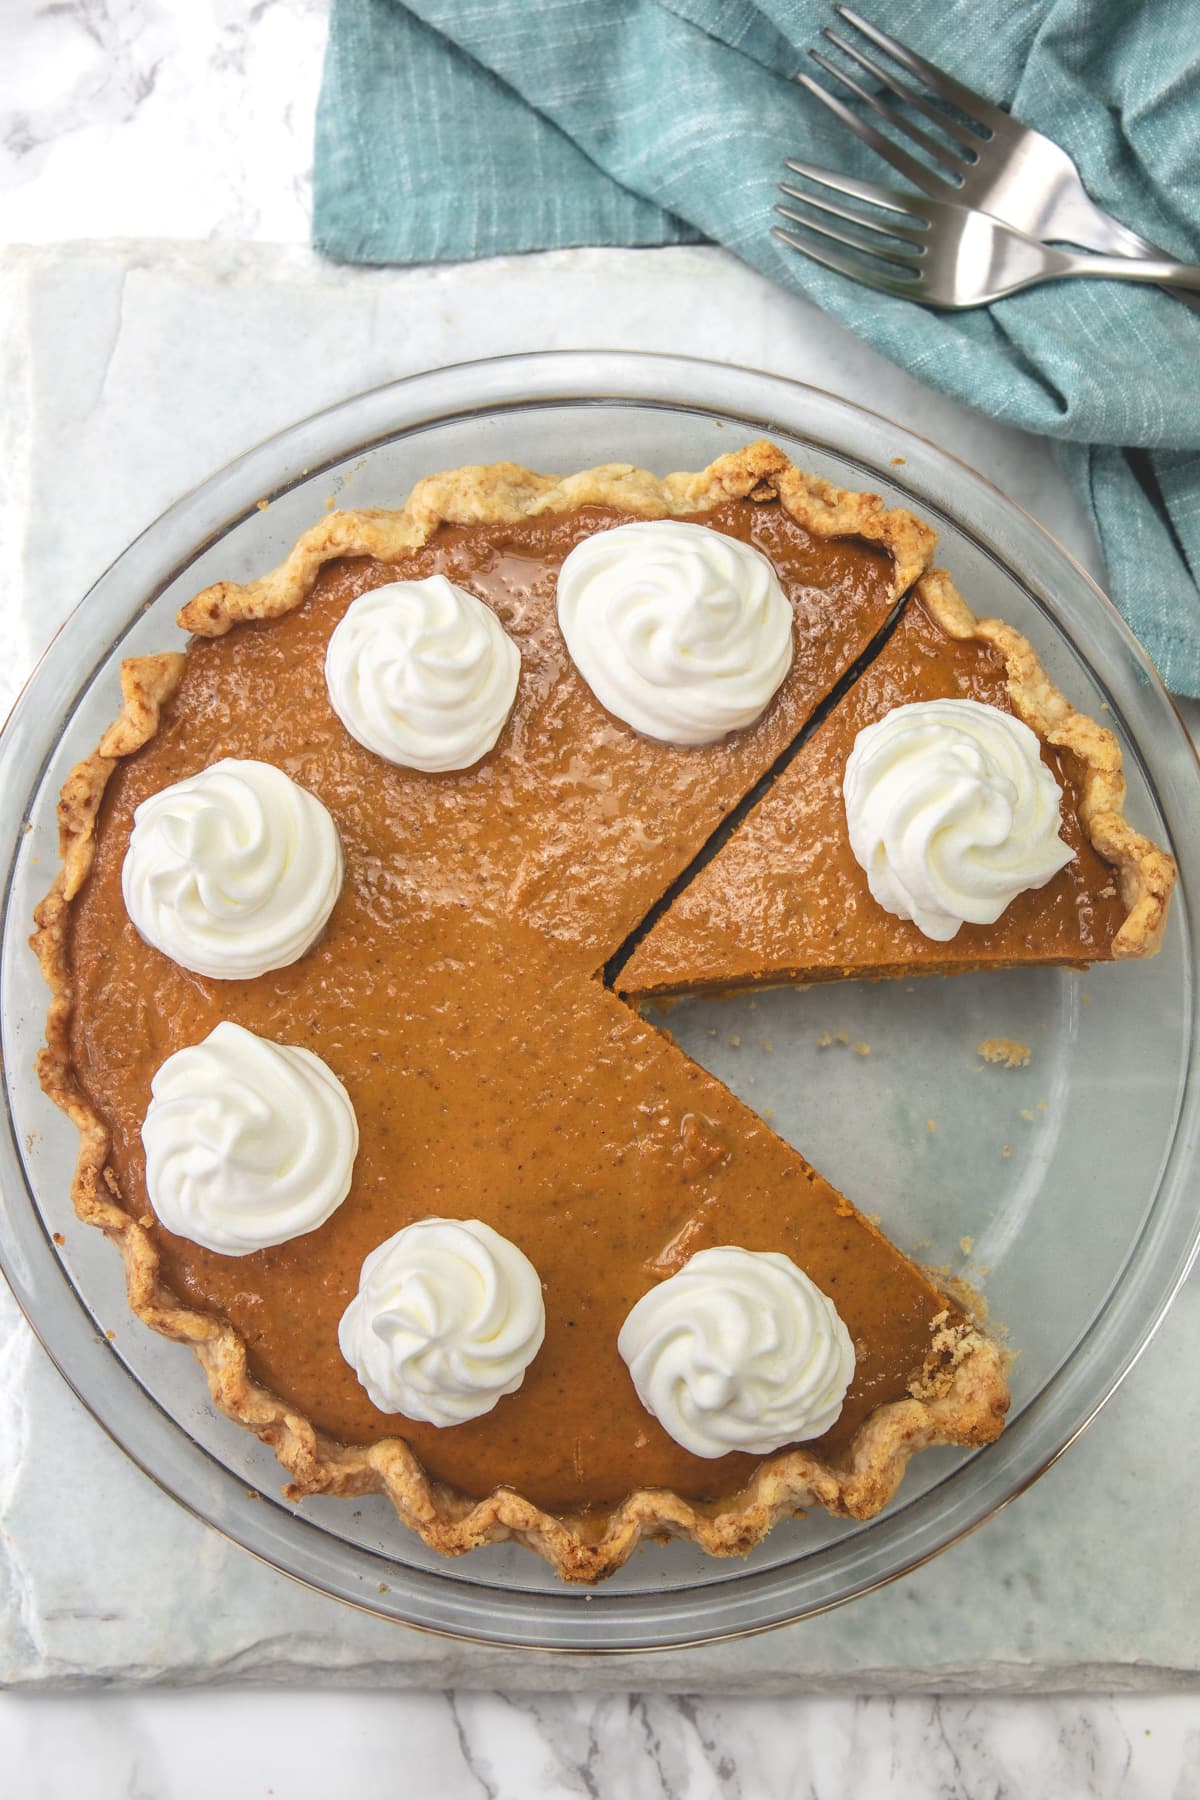 Once slice of eggless pumpkin pie is taken from a pie plate.